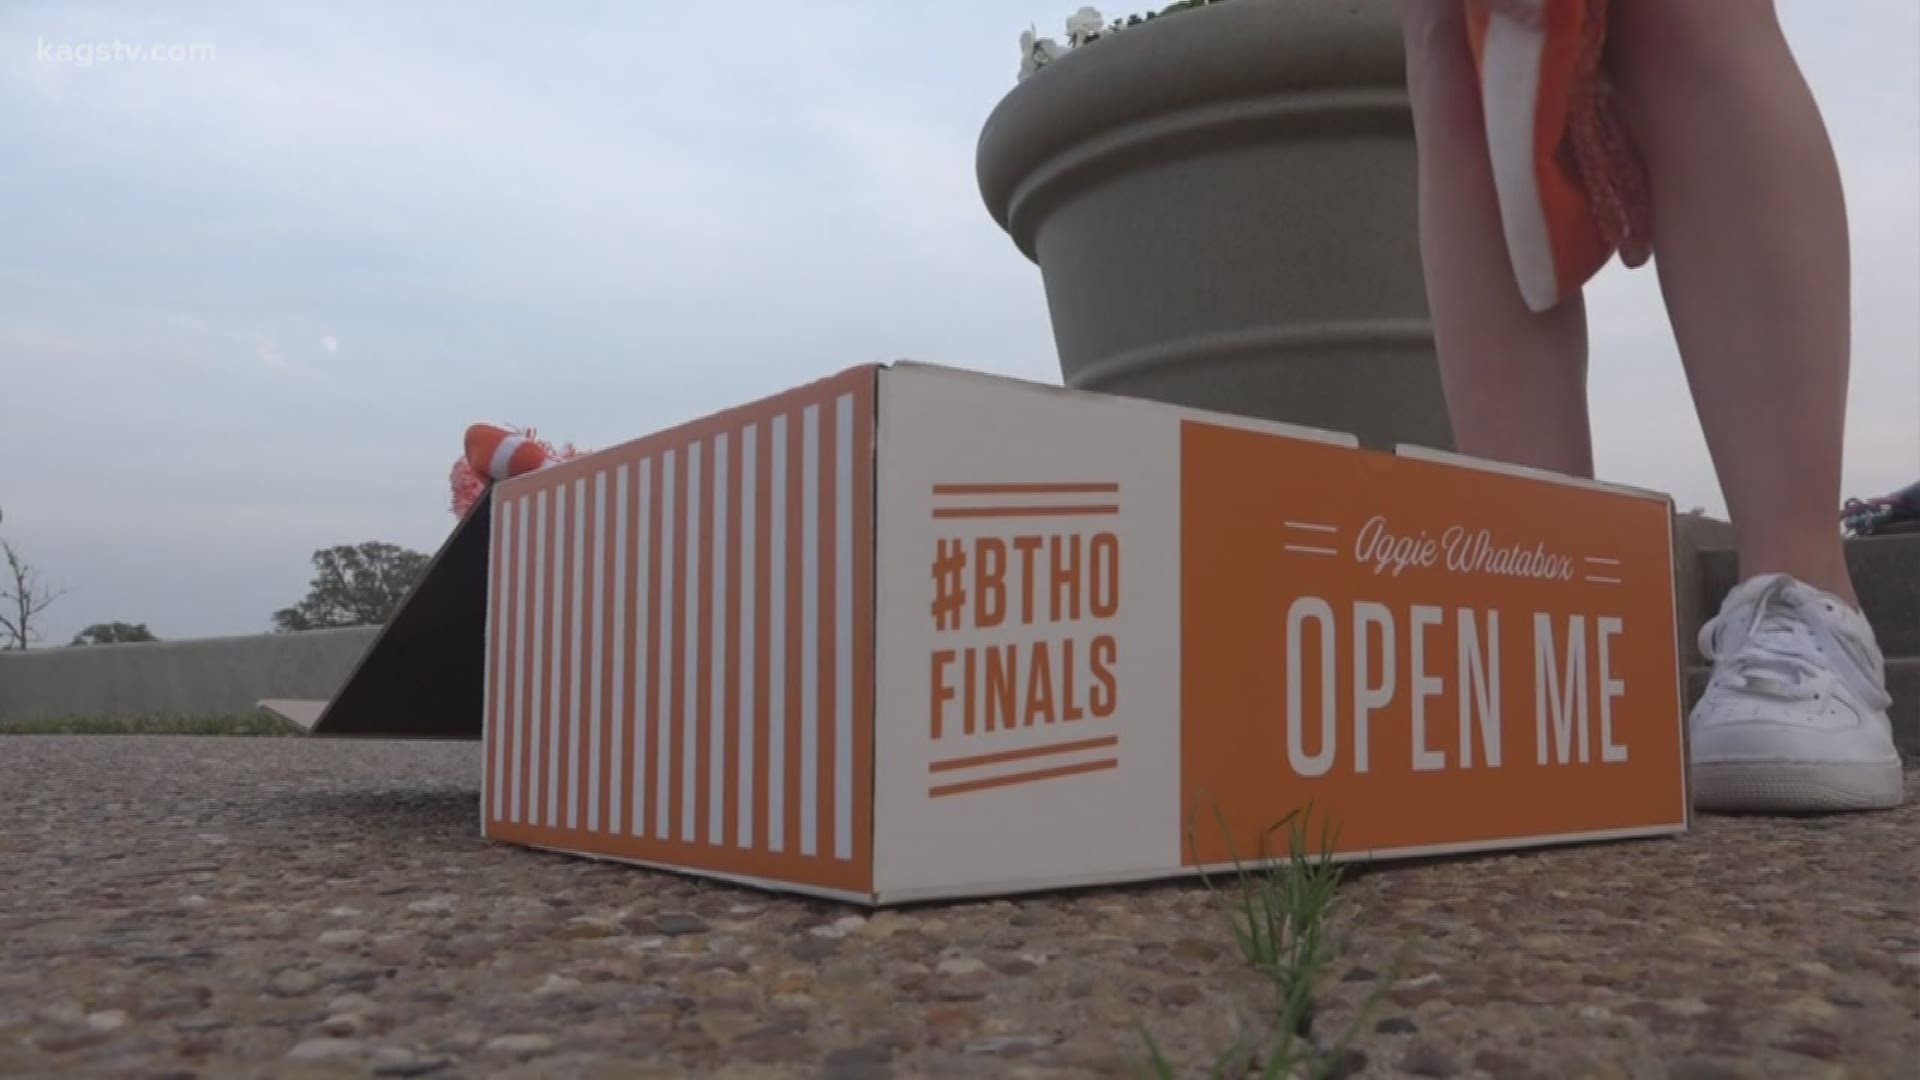 Whataburger and TAMU hid 25 boxes on Monday for students to encourage them to "Beat the Hell Out of Finals".